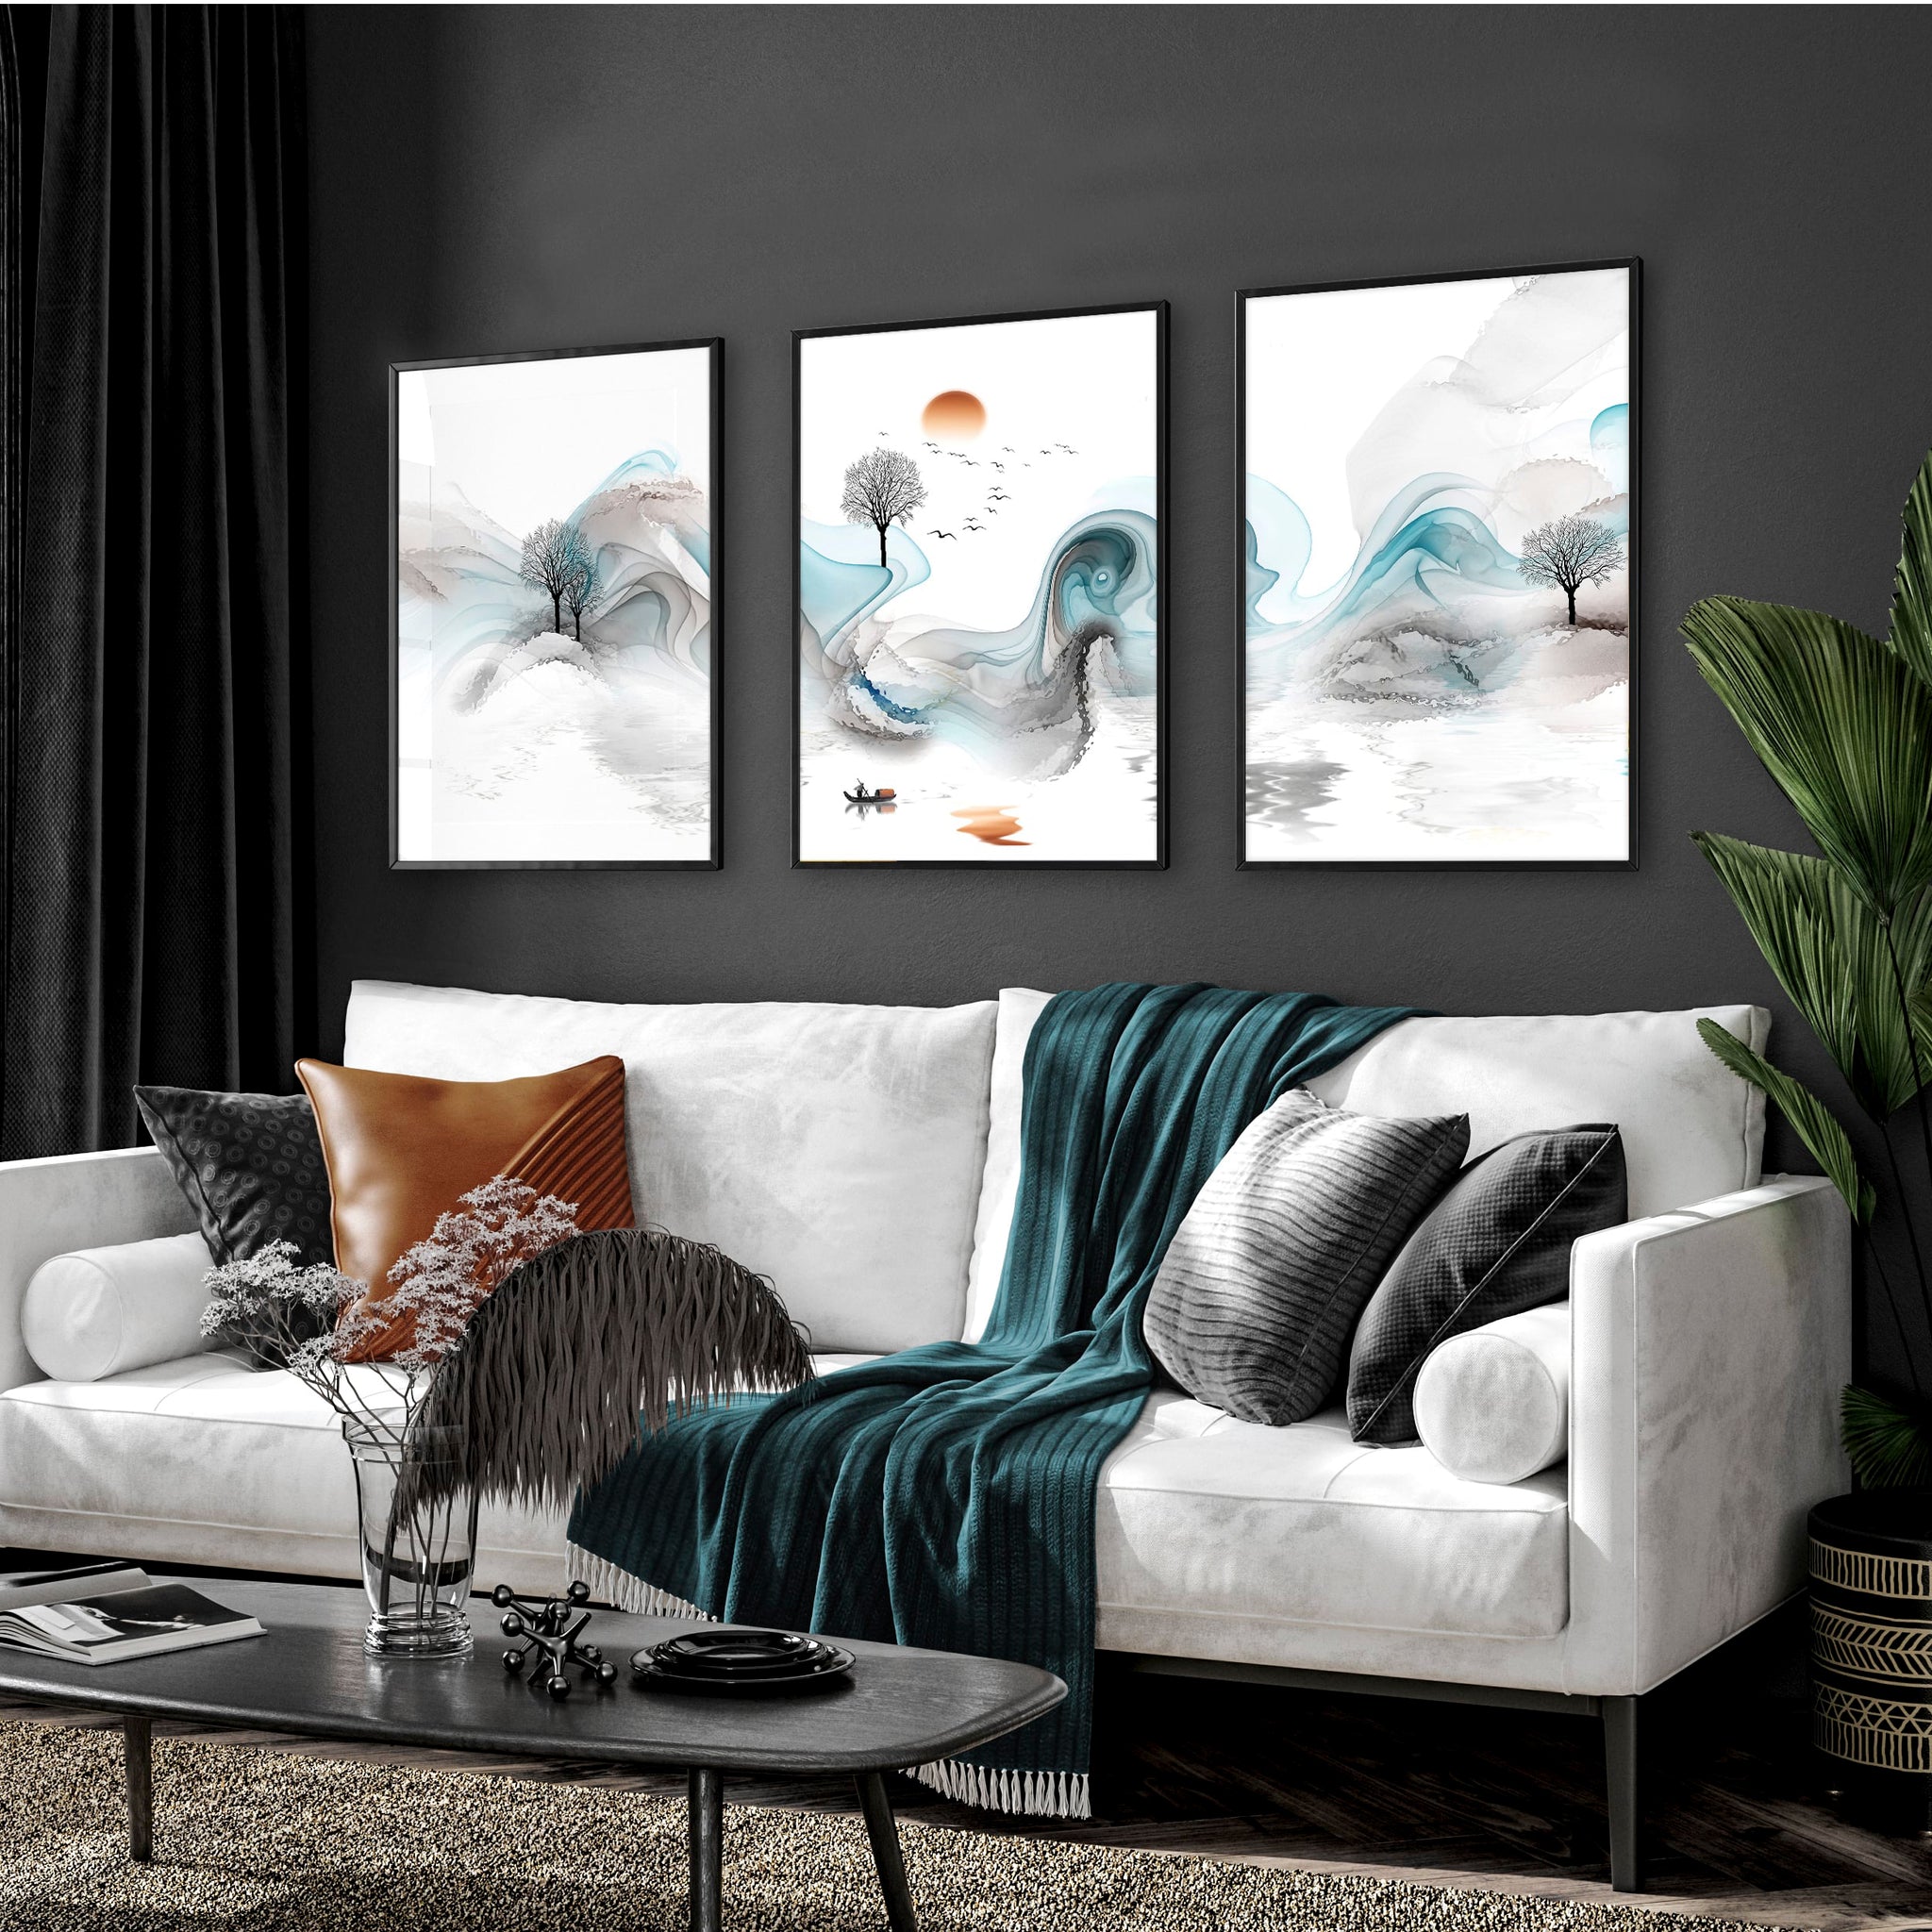 Unique wall art upgrades the feel of a peaceful living room